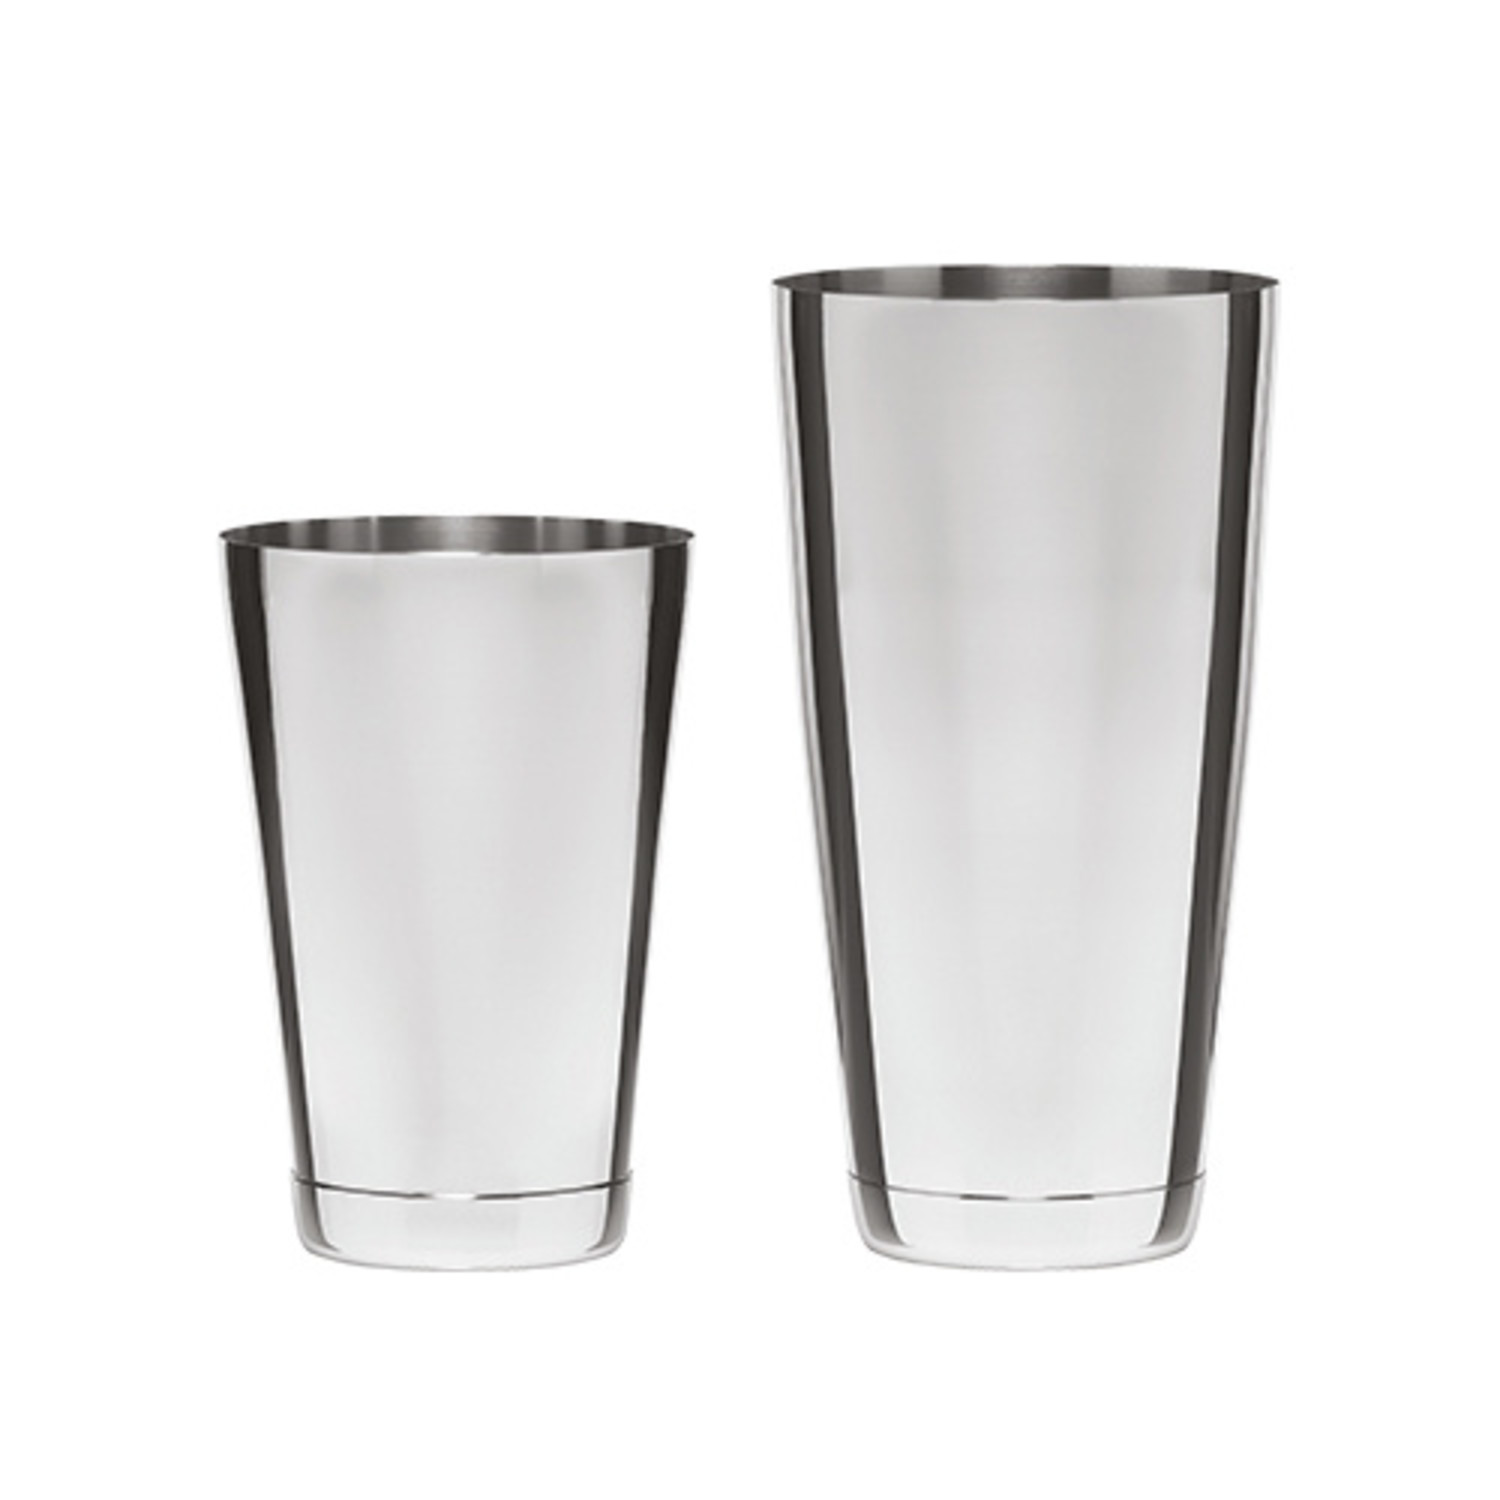 2-piece Stainless Steel Shaker Set - Dillon's Small Batch Distillers